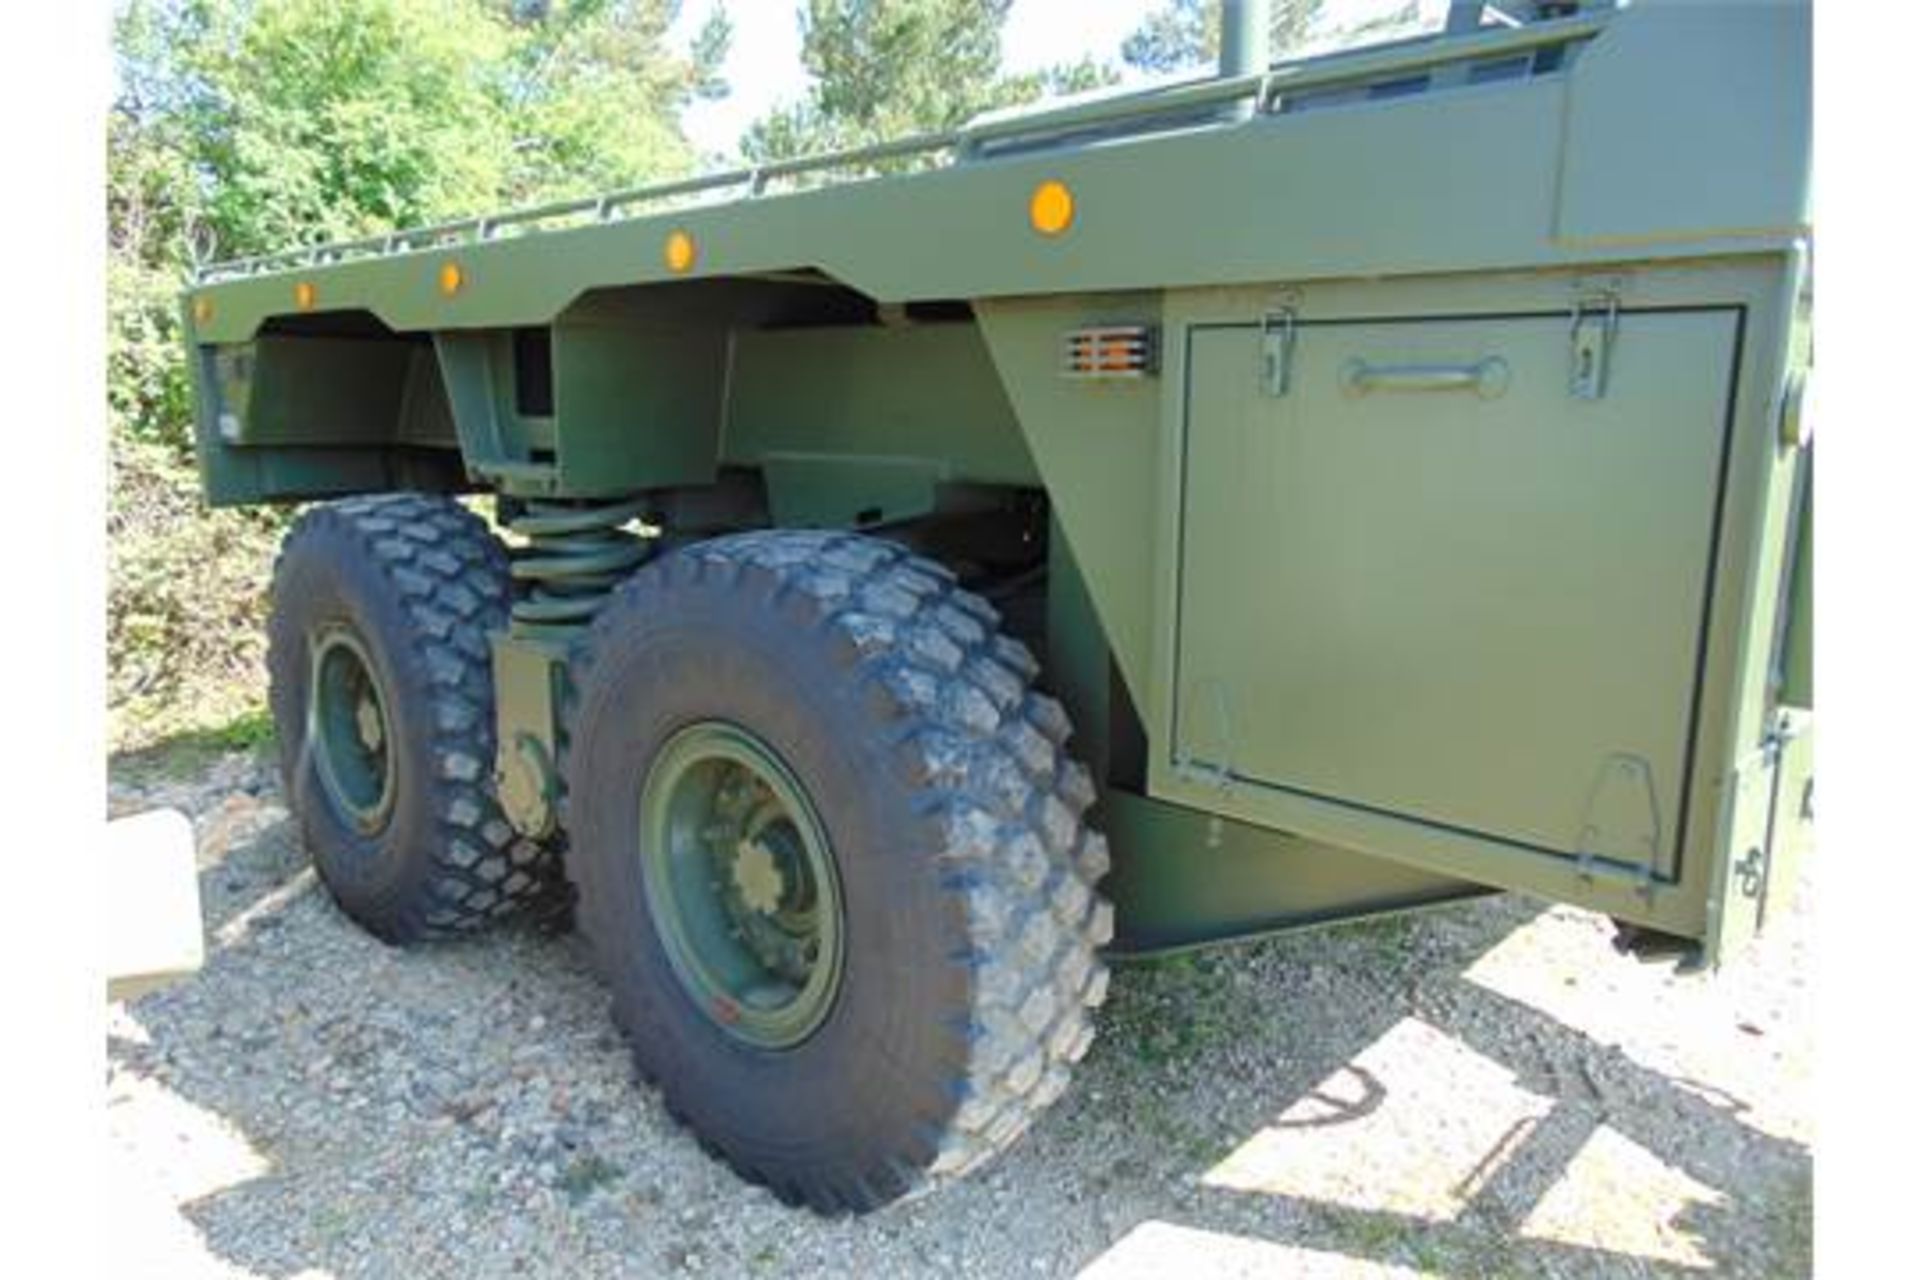 EX RESERVE UNISSUED Reynolds Boughton 15.5 Ton GVW High Mobility Trailer - Image 3 of 8